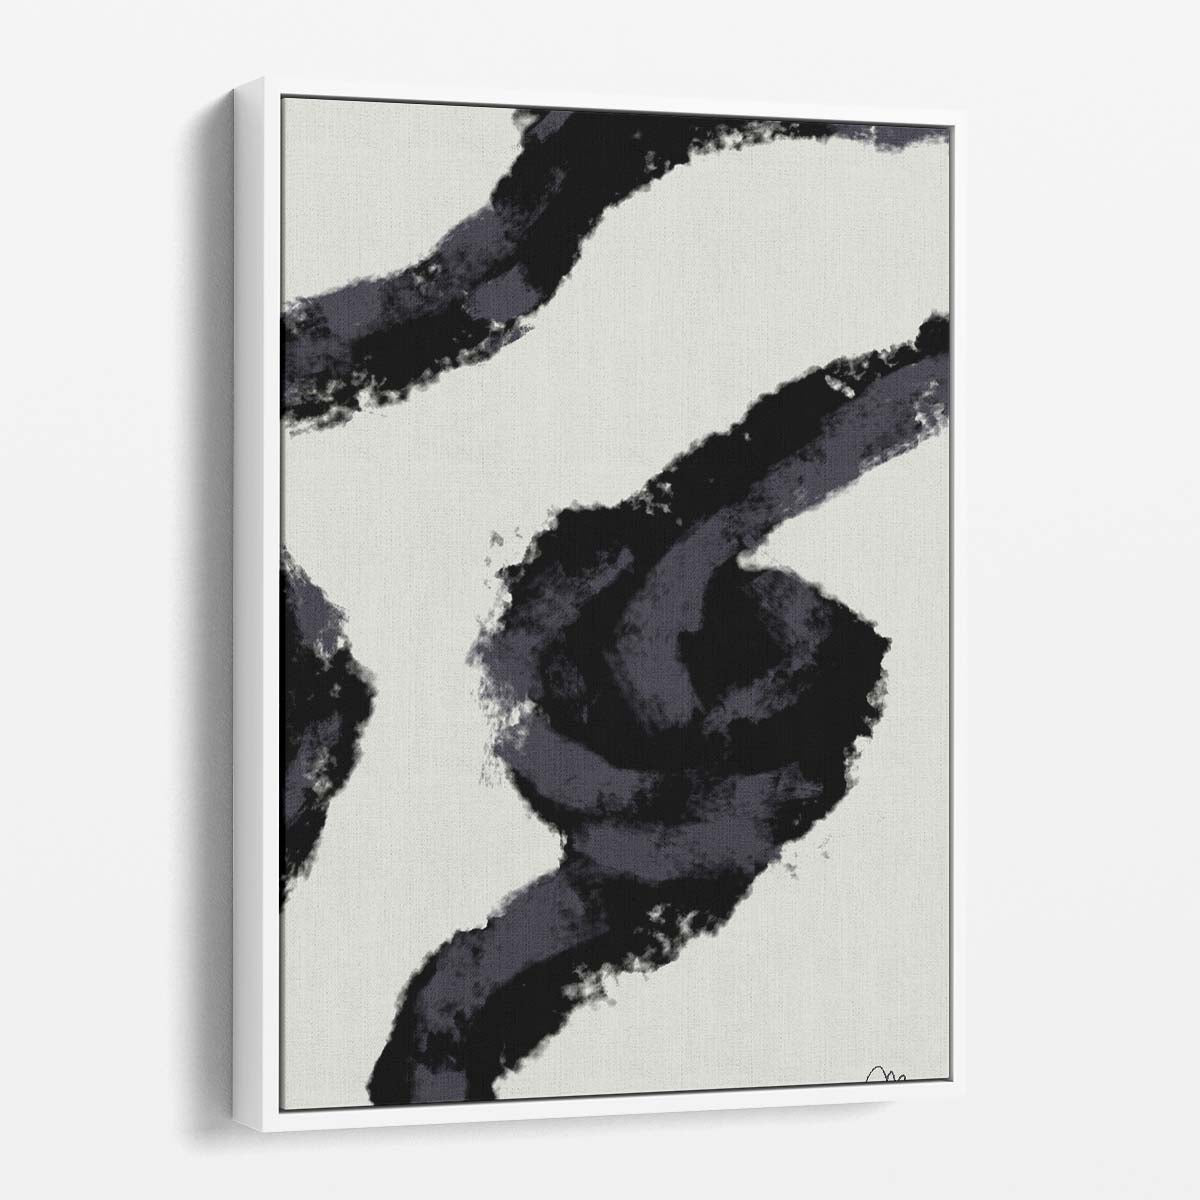 Abstract Illustration Painting Black Rope with Colorful Brush Strokes by Luxuriance Designs, made in USA